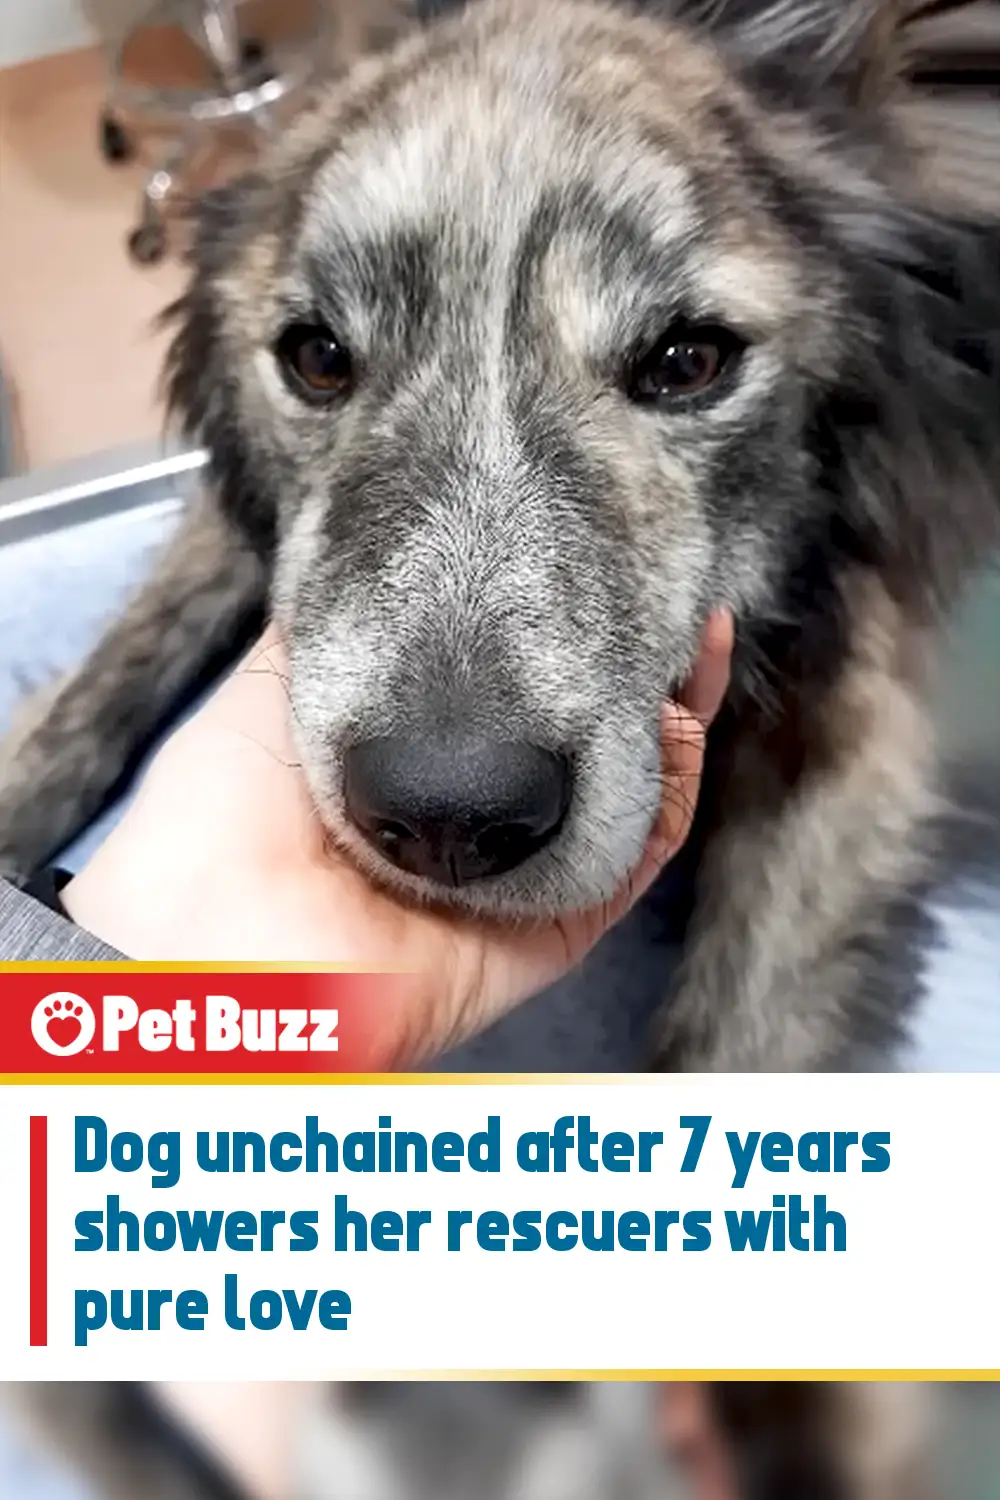 Dog unchained after 7 years showers her rescuers with pure love